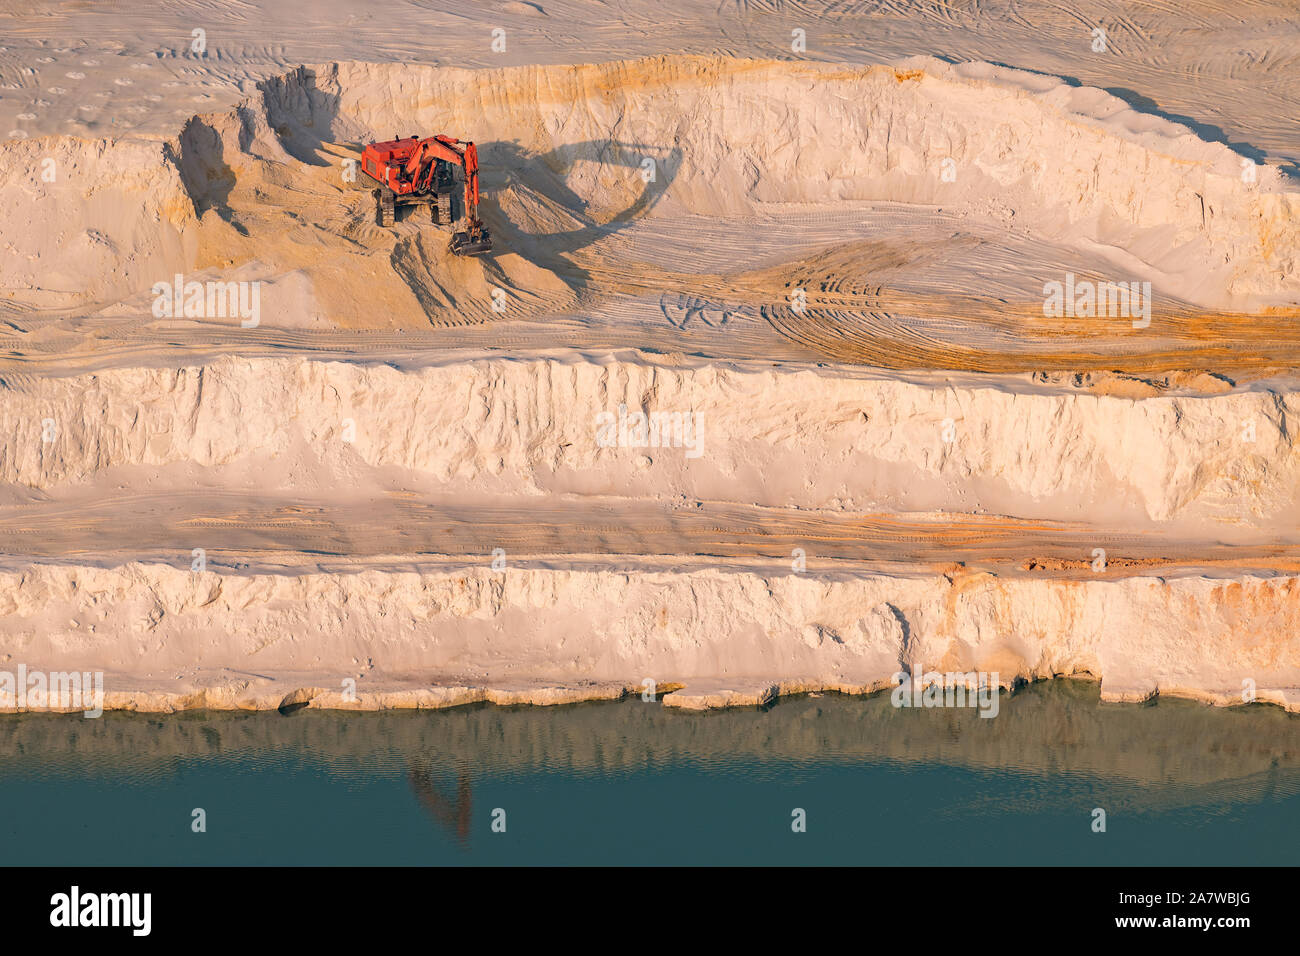 Excavator at work in a glass sand quarry on aerial photo Stock Photo